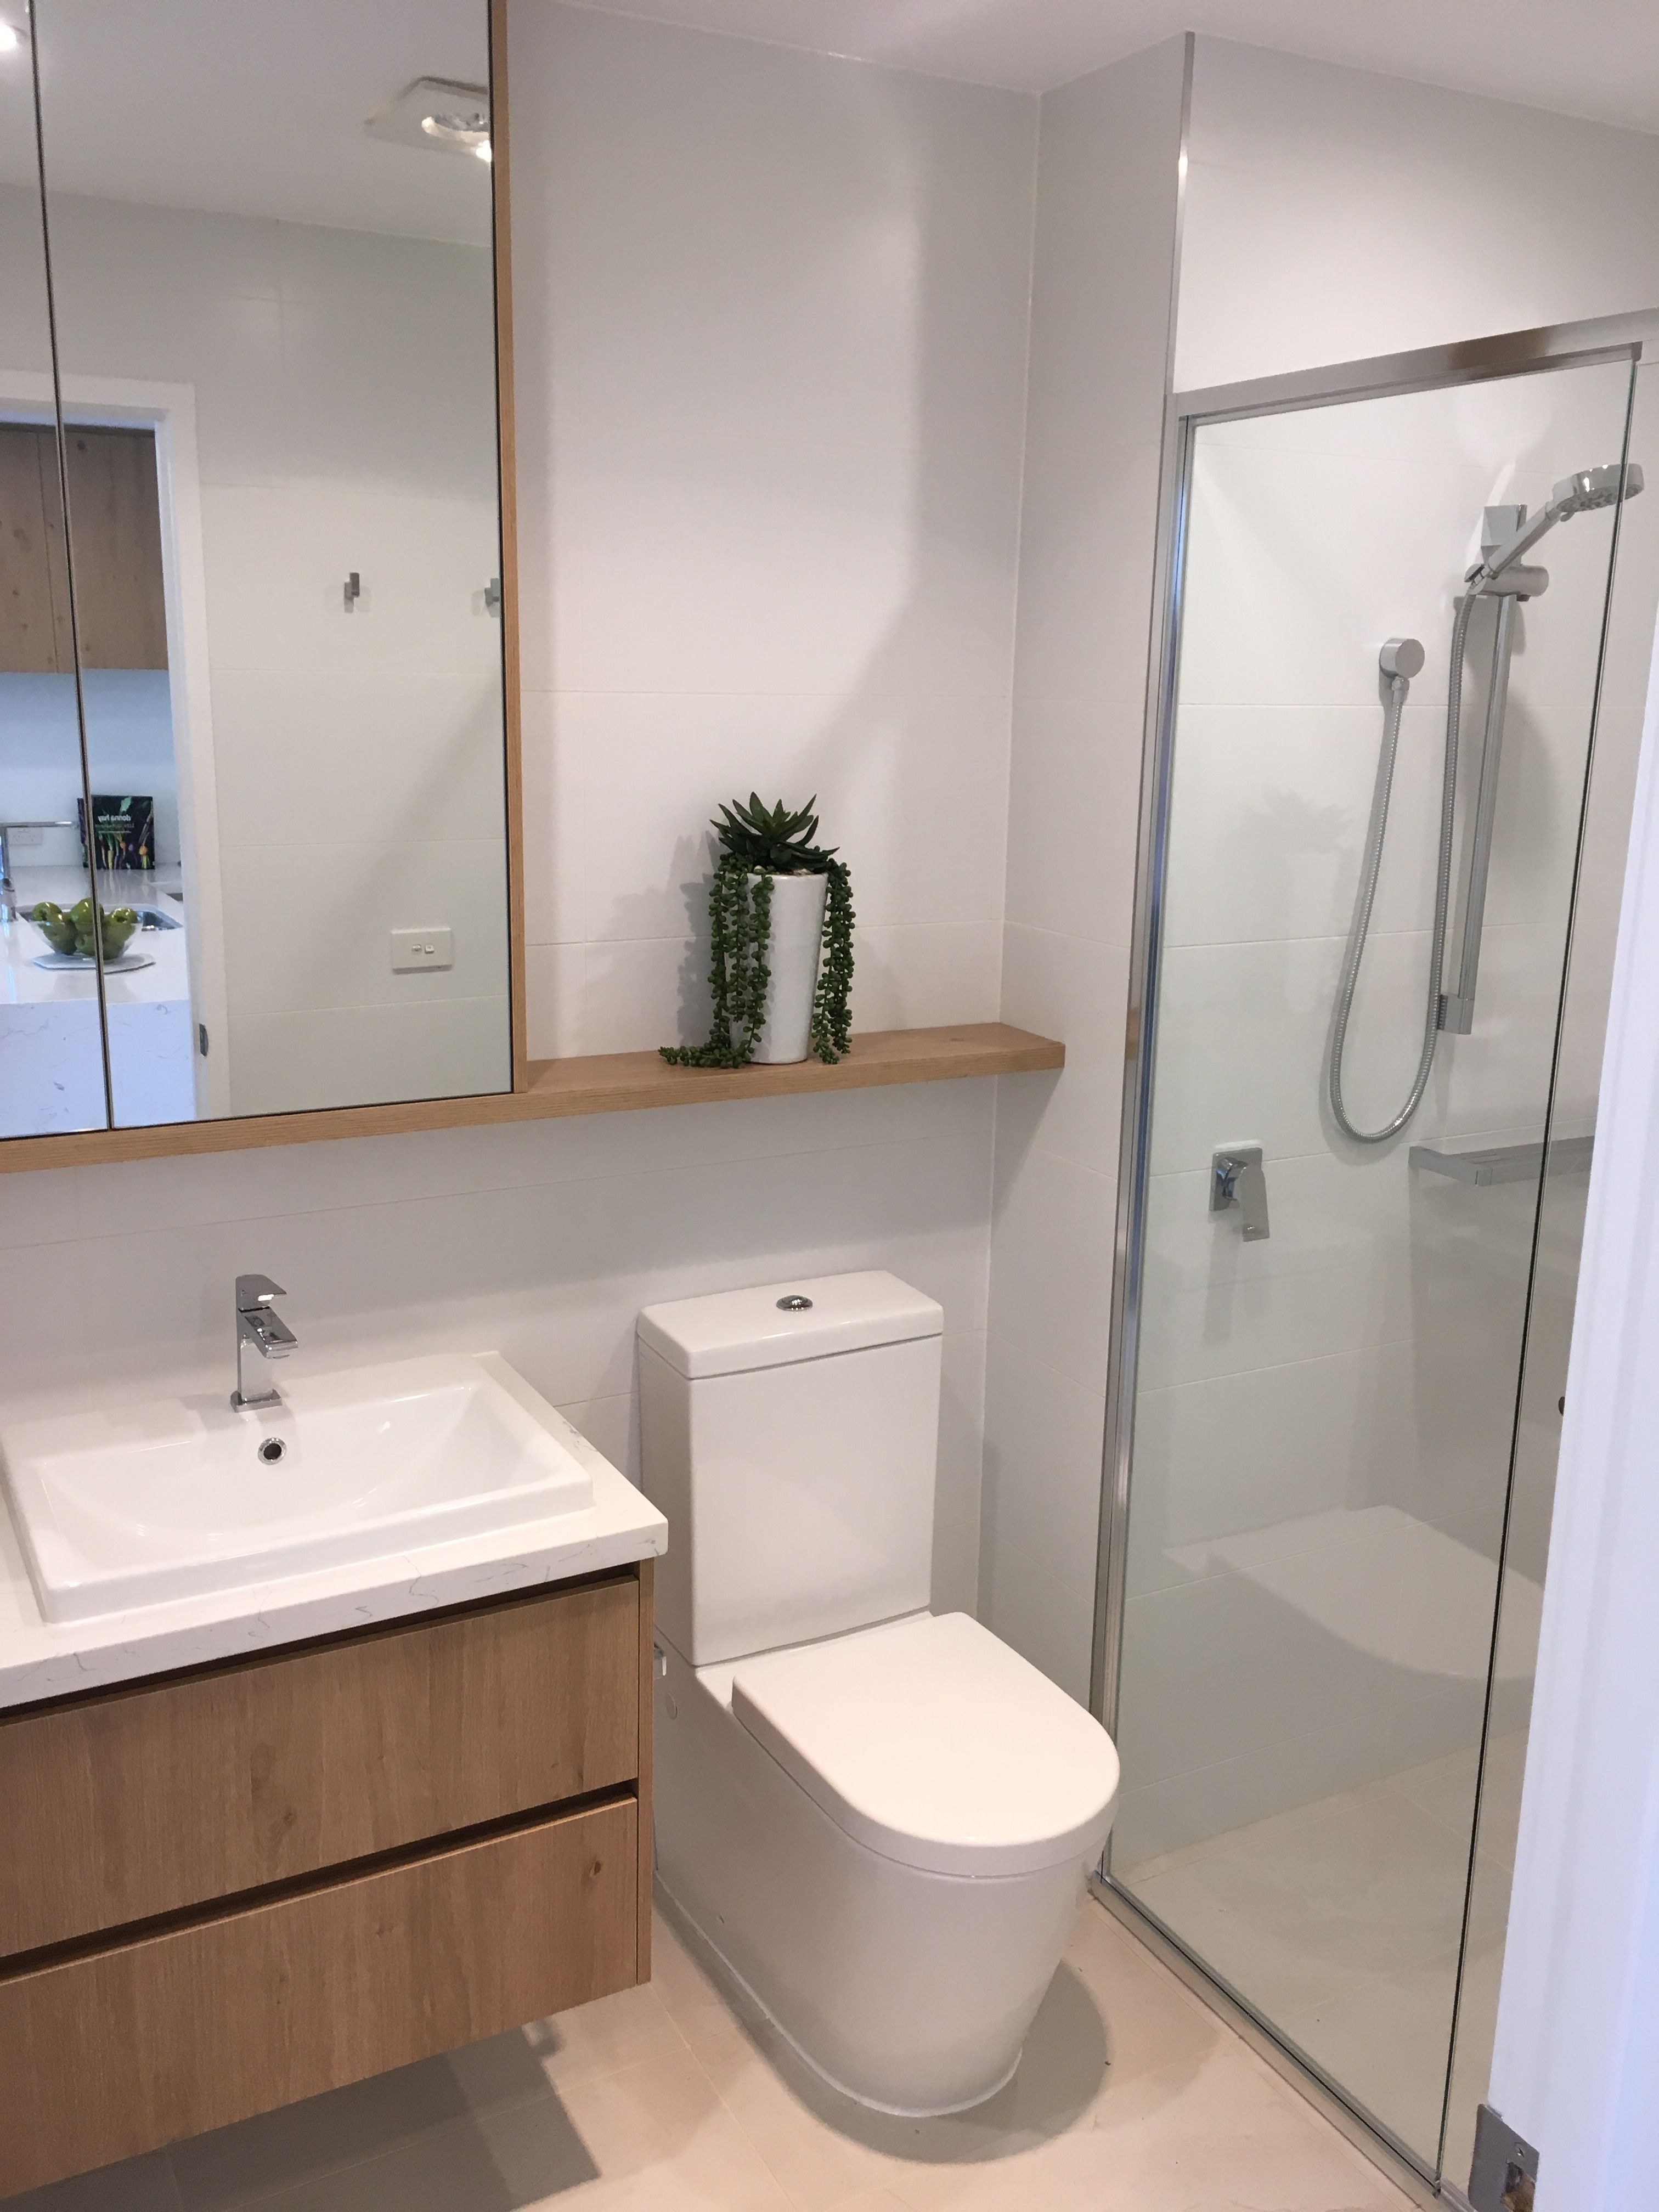 Photo of the bathroom inside the sales display. Photo taken by Property Mash 30/11/2016.